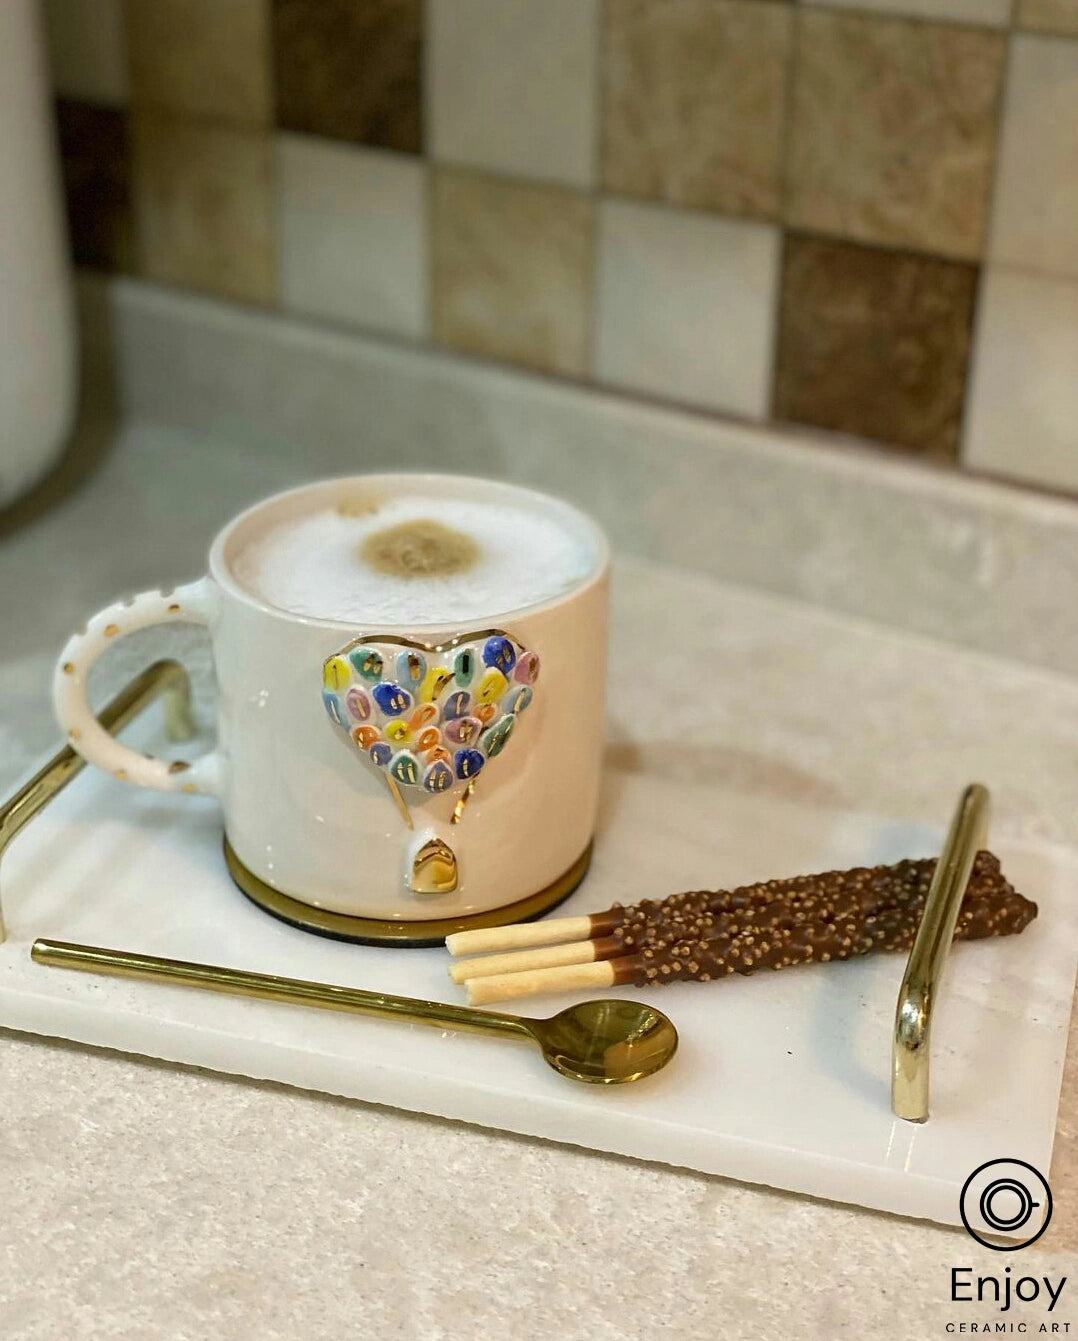 Disney Pixar's 'Up' Themed Ceramic Espresso Cup & Saucer Set - Handmade Carl and Ellie Coffee Cup - Perfect for Espresso Lovers and Disney Fans